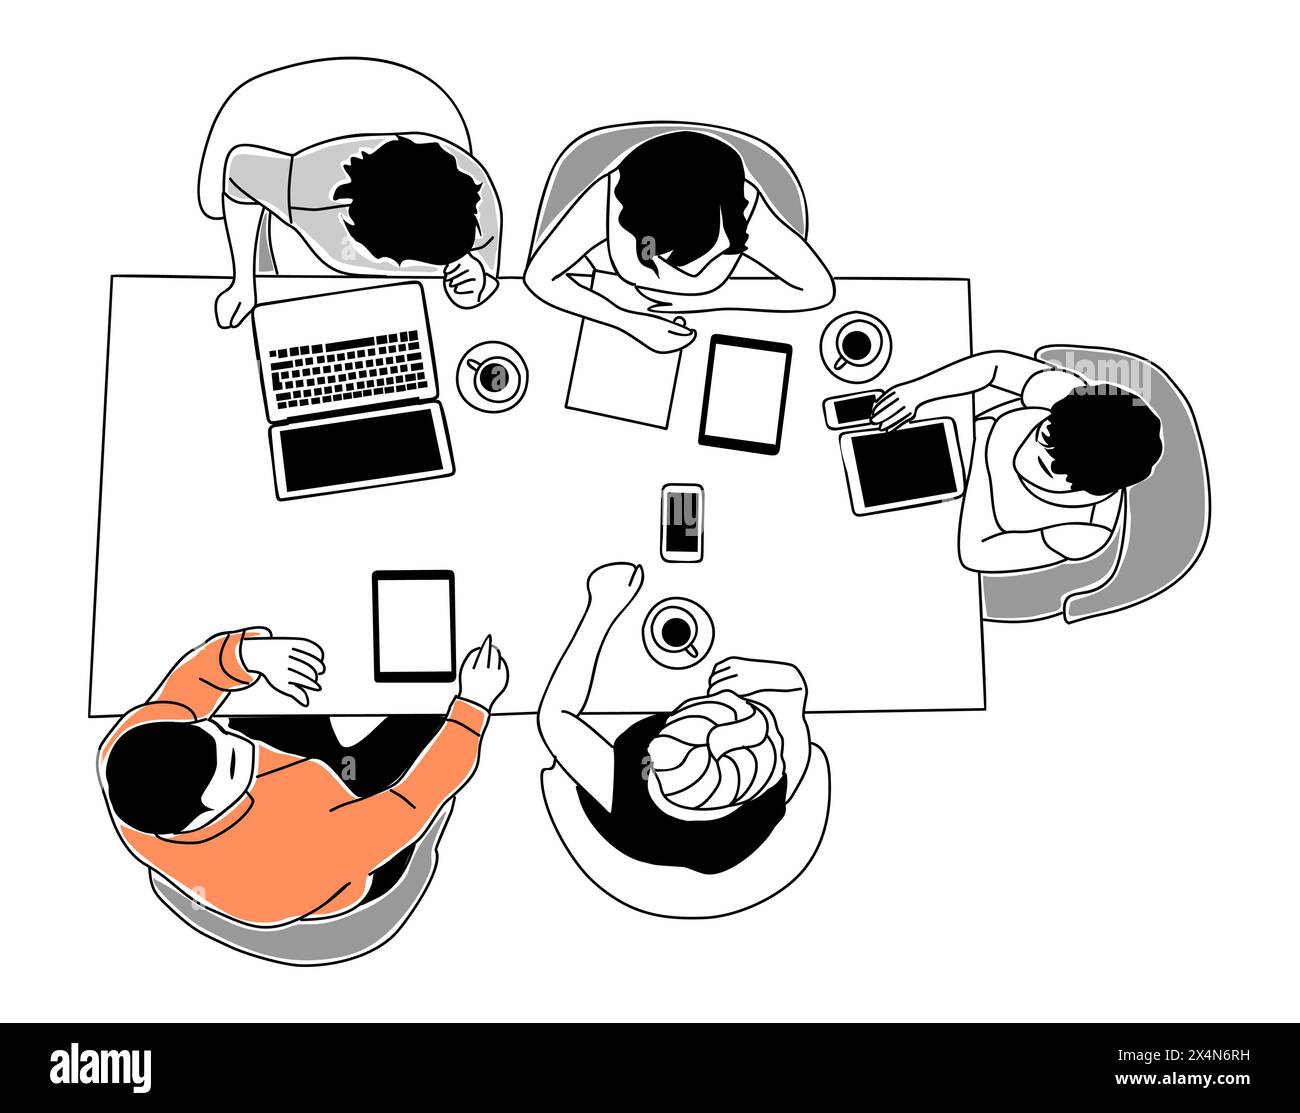 Business people are sitting around a table with laptops. They are discussing, brainstorming, meeting, working together. Scene is collaborative and foc Stock Vector